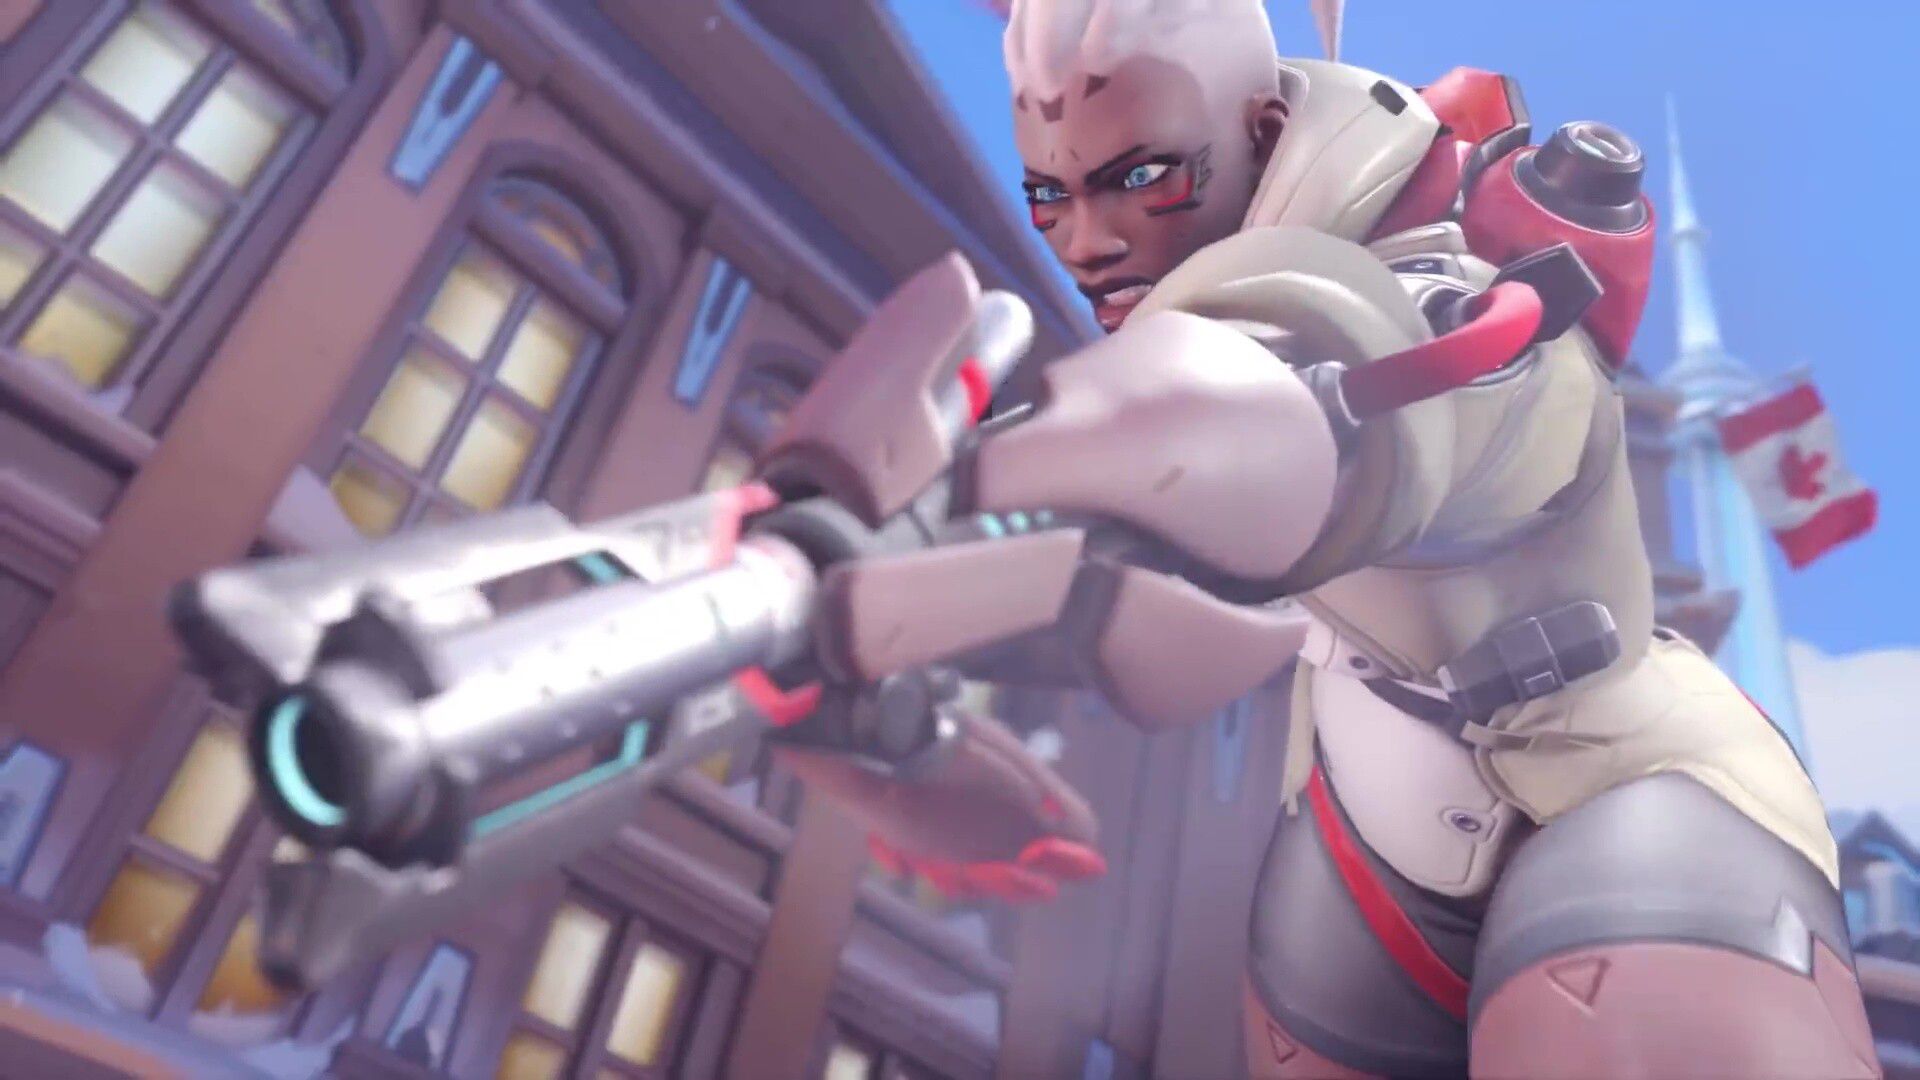 "Sojoan", a new character with a powerful rocket-equipped thigh with a whip whip of the Overwatch 2 machine 20